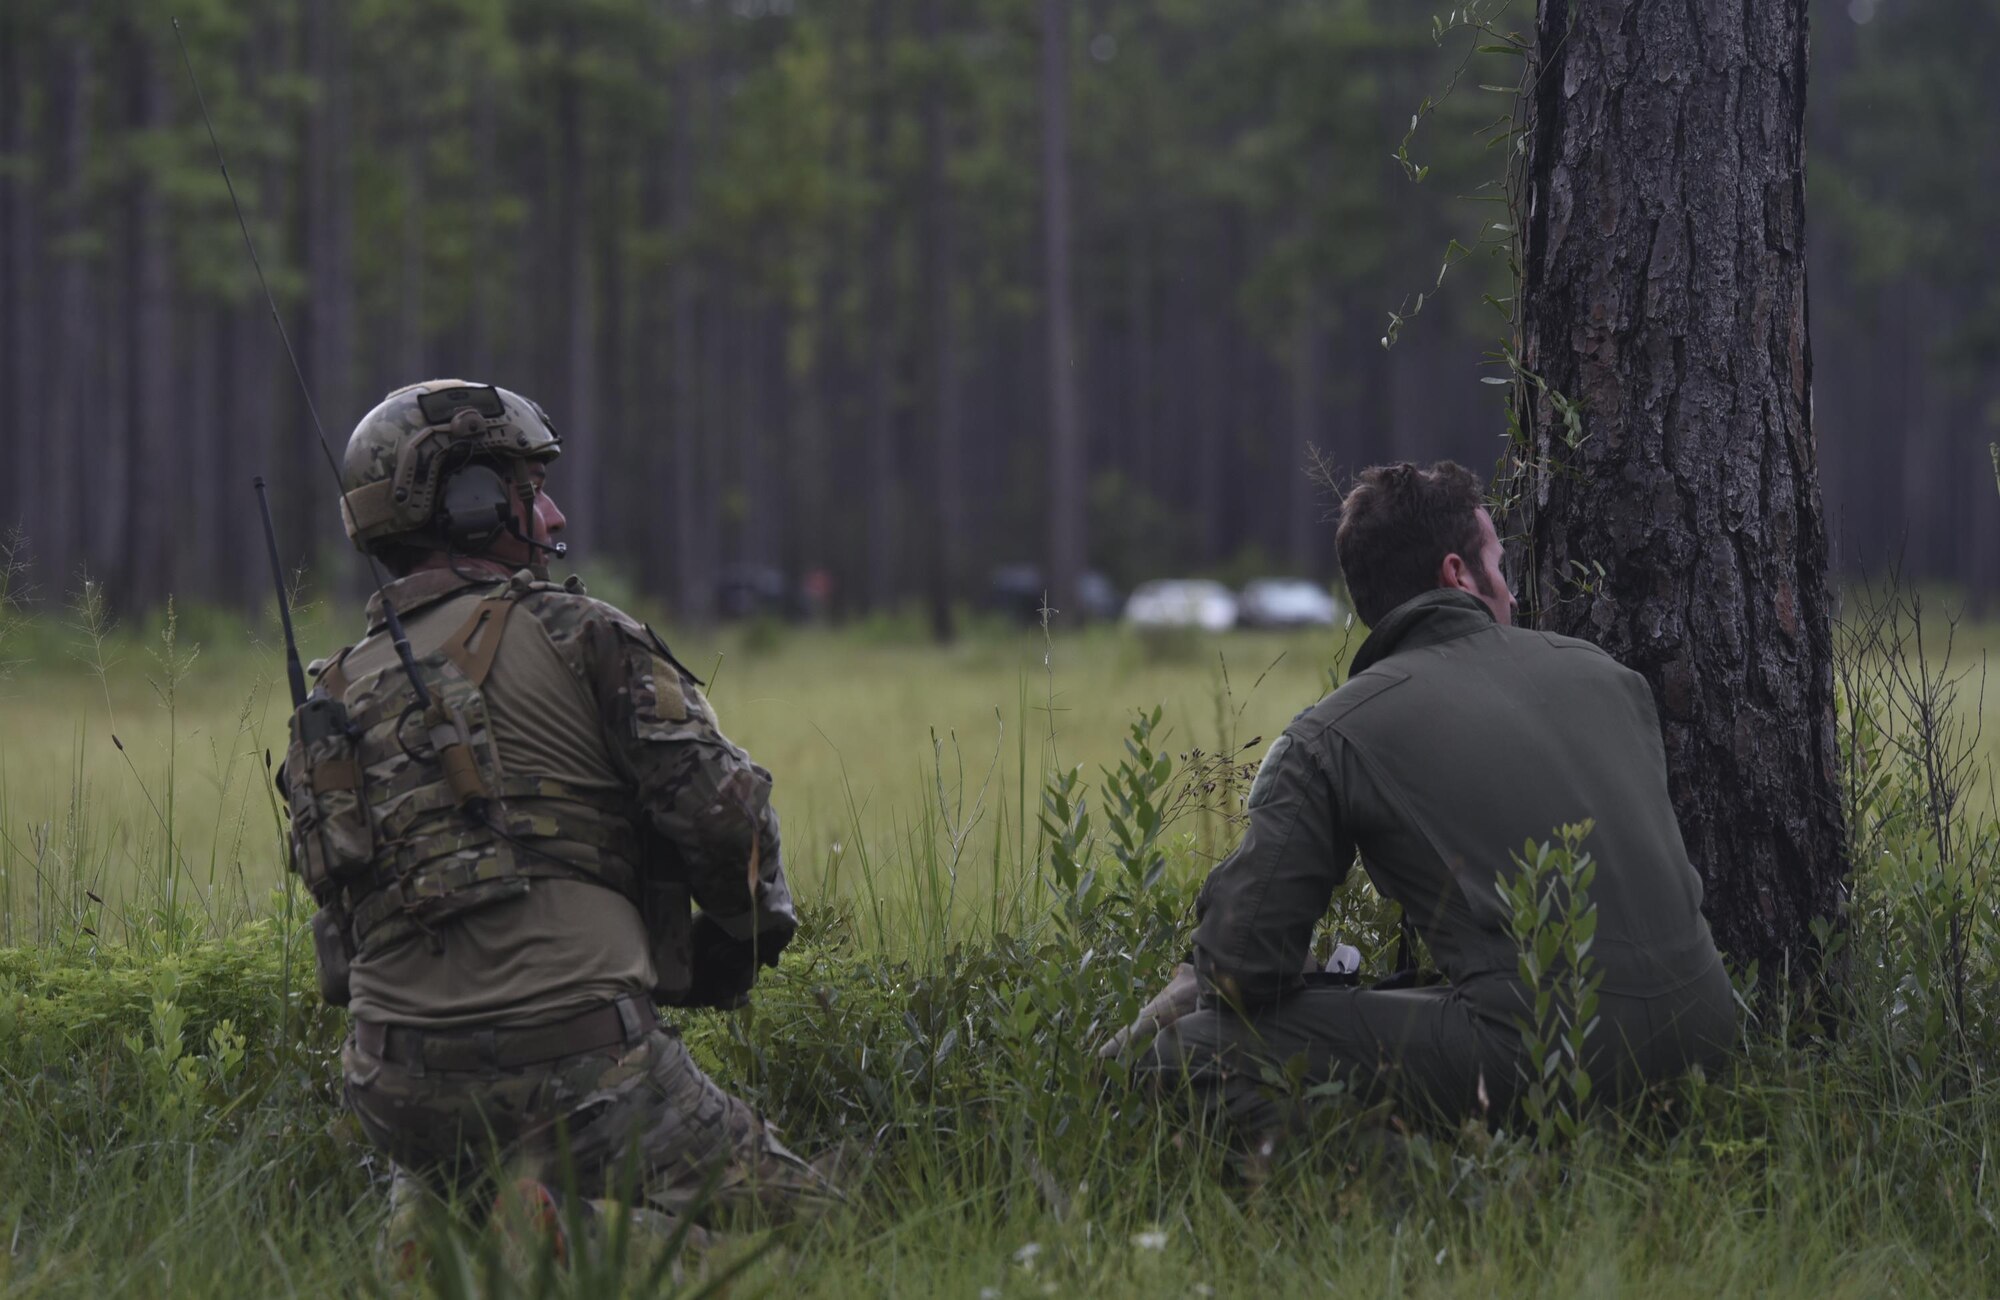 A U.S. Air Force Survival, Evasion, Resistance and Escape technician from Moody Air Force Base, Ga., (Left) and a simulated downed F-22 Raptor pilot from Tyndall Air Force Base, Fla., watch as an HH-60G Pave Hawk flies into a landing zone in wooded area near Tyndall, during exercise Stealth Guardian Aug. 8, 2017.